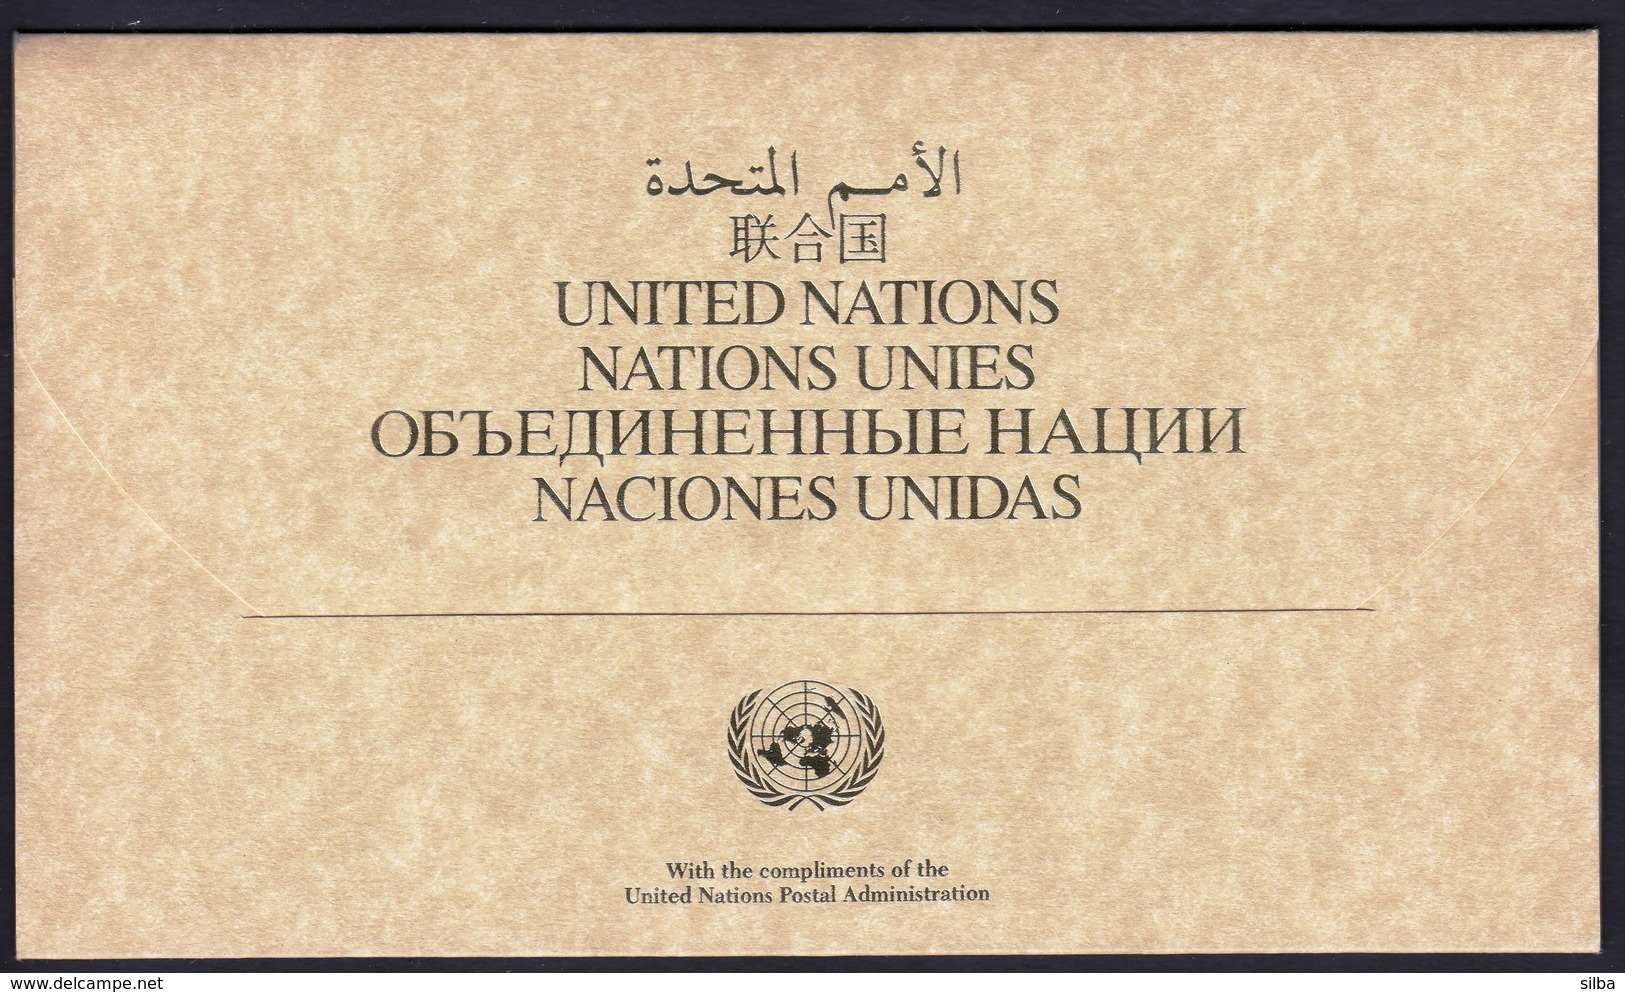 United Nations New York 2000 / International Flag Of Peace, Earth, Sun / FDC, Stamps Folder - Lettres & Documents